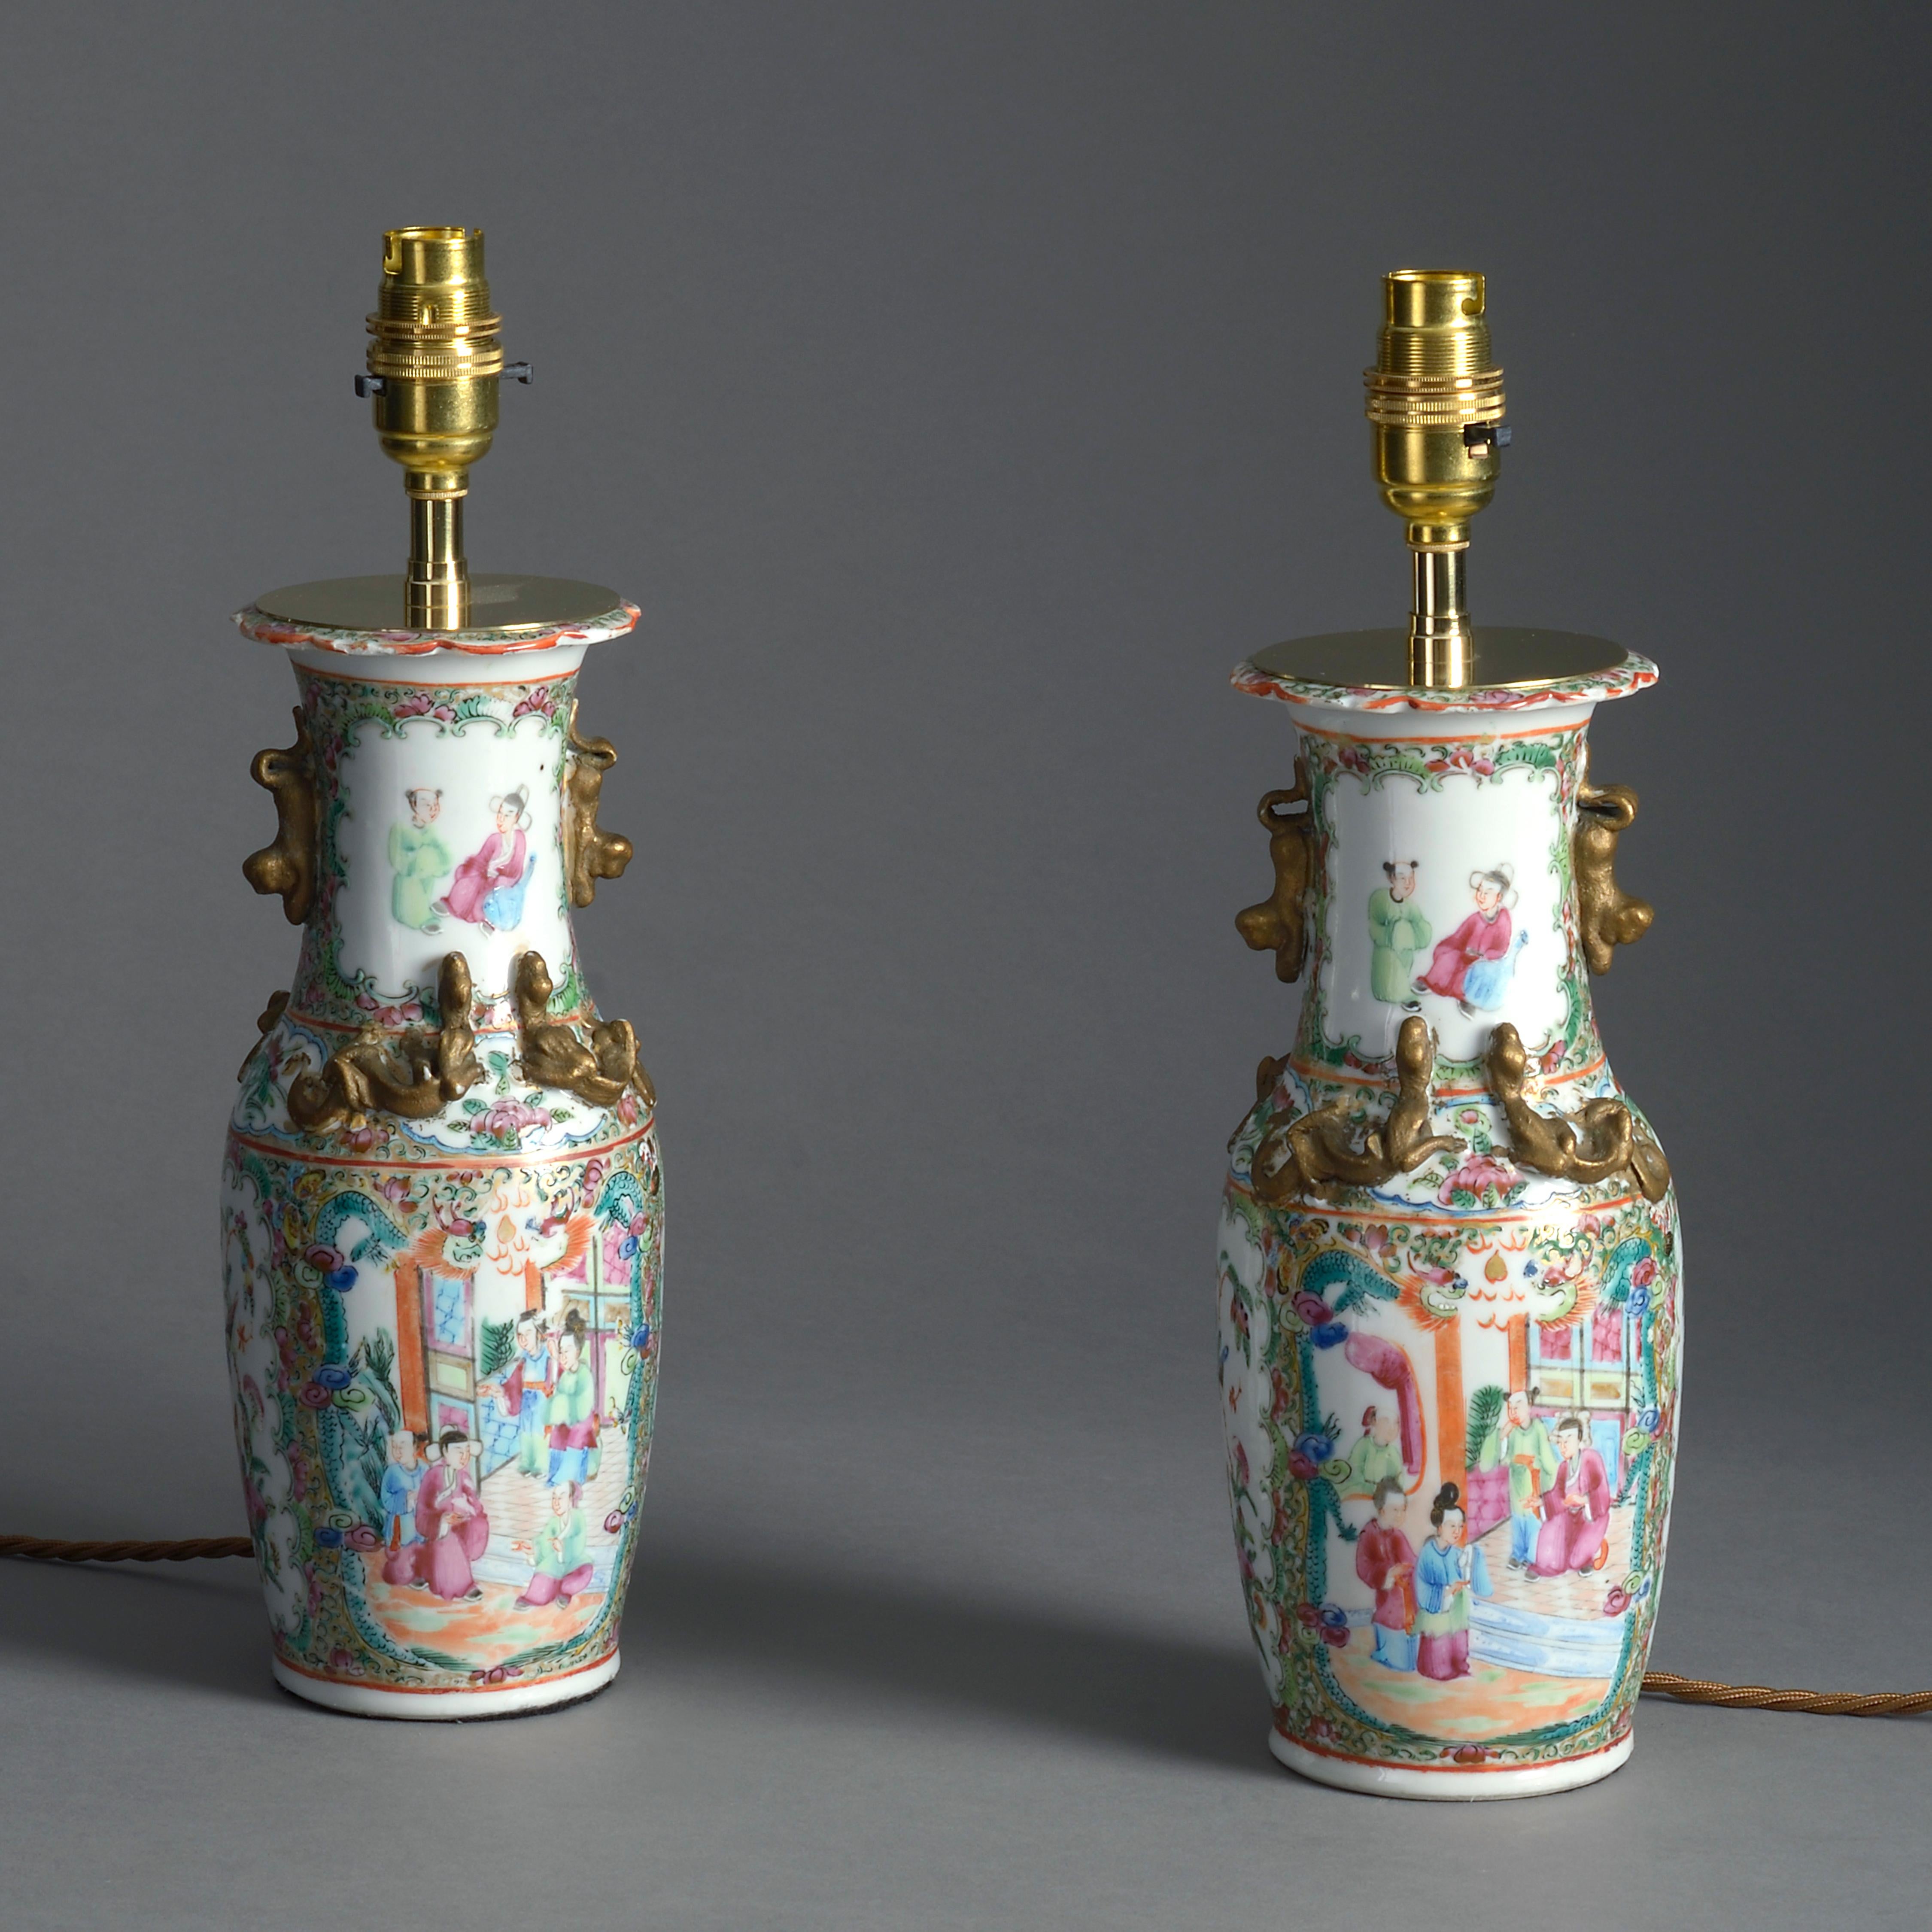 A pair of small scale famille rose porcelain mandarin vases, decorated throughout with figurative cartouches, birds, insects and flowers, with gilded dragons upon the shoulders in the traditional manner. Now mounted as table lamps.

Dimensions